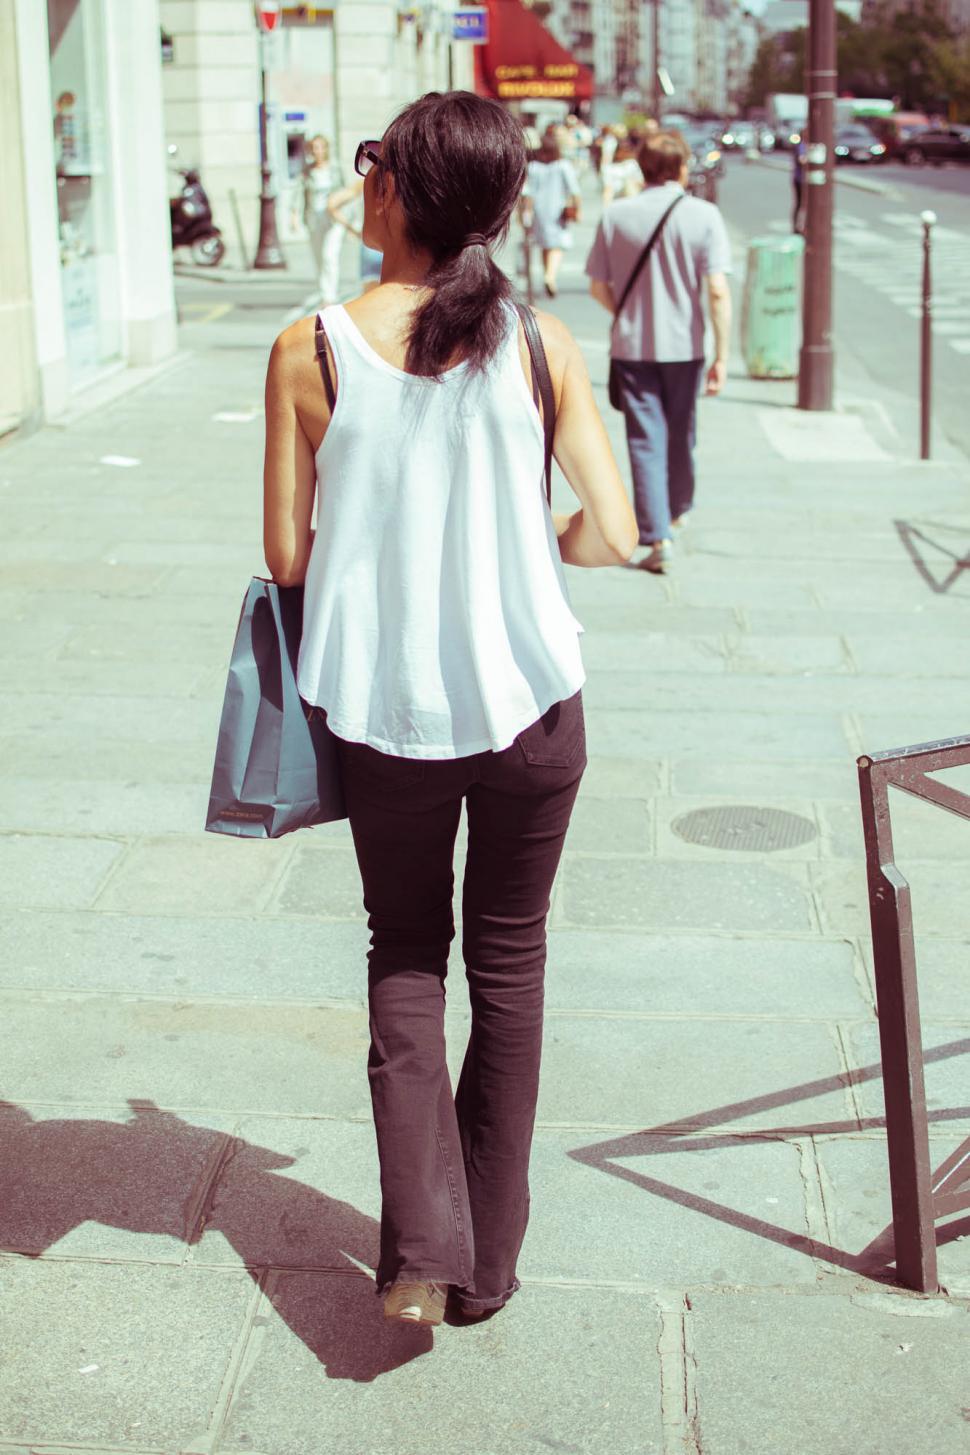 Free Image of Woman on the street 